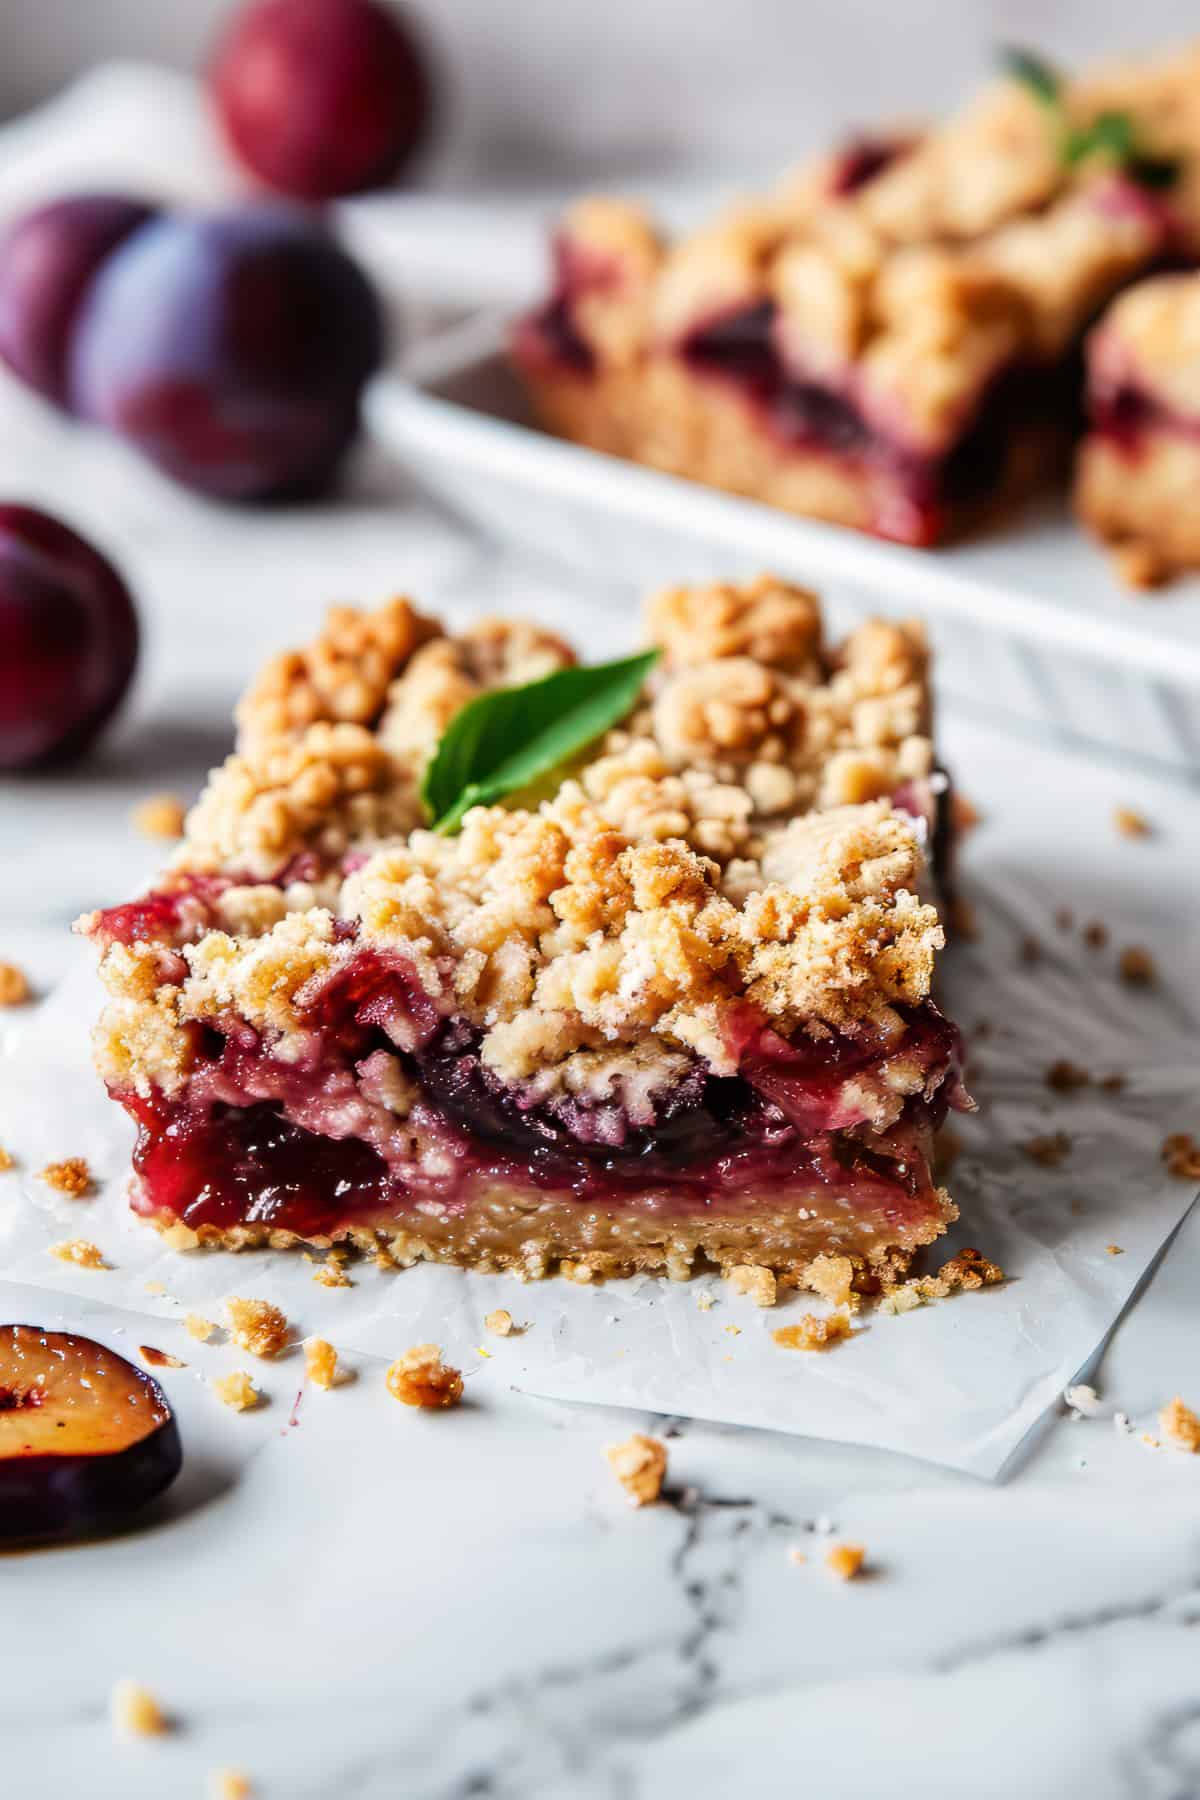 Plum bars with oat crumble topping on a piece of baking paper.